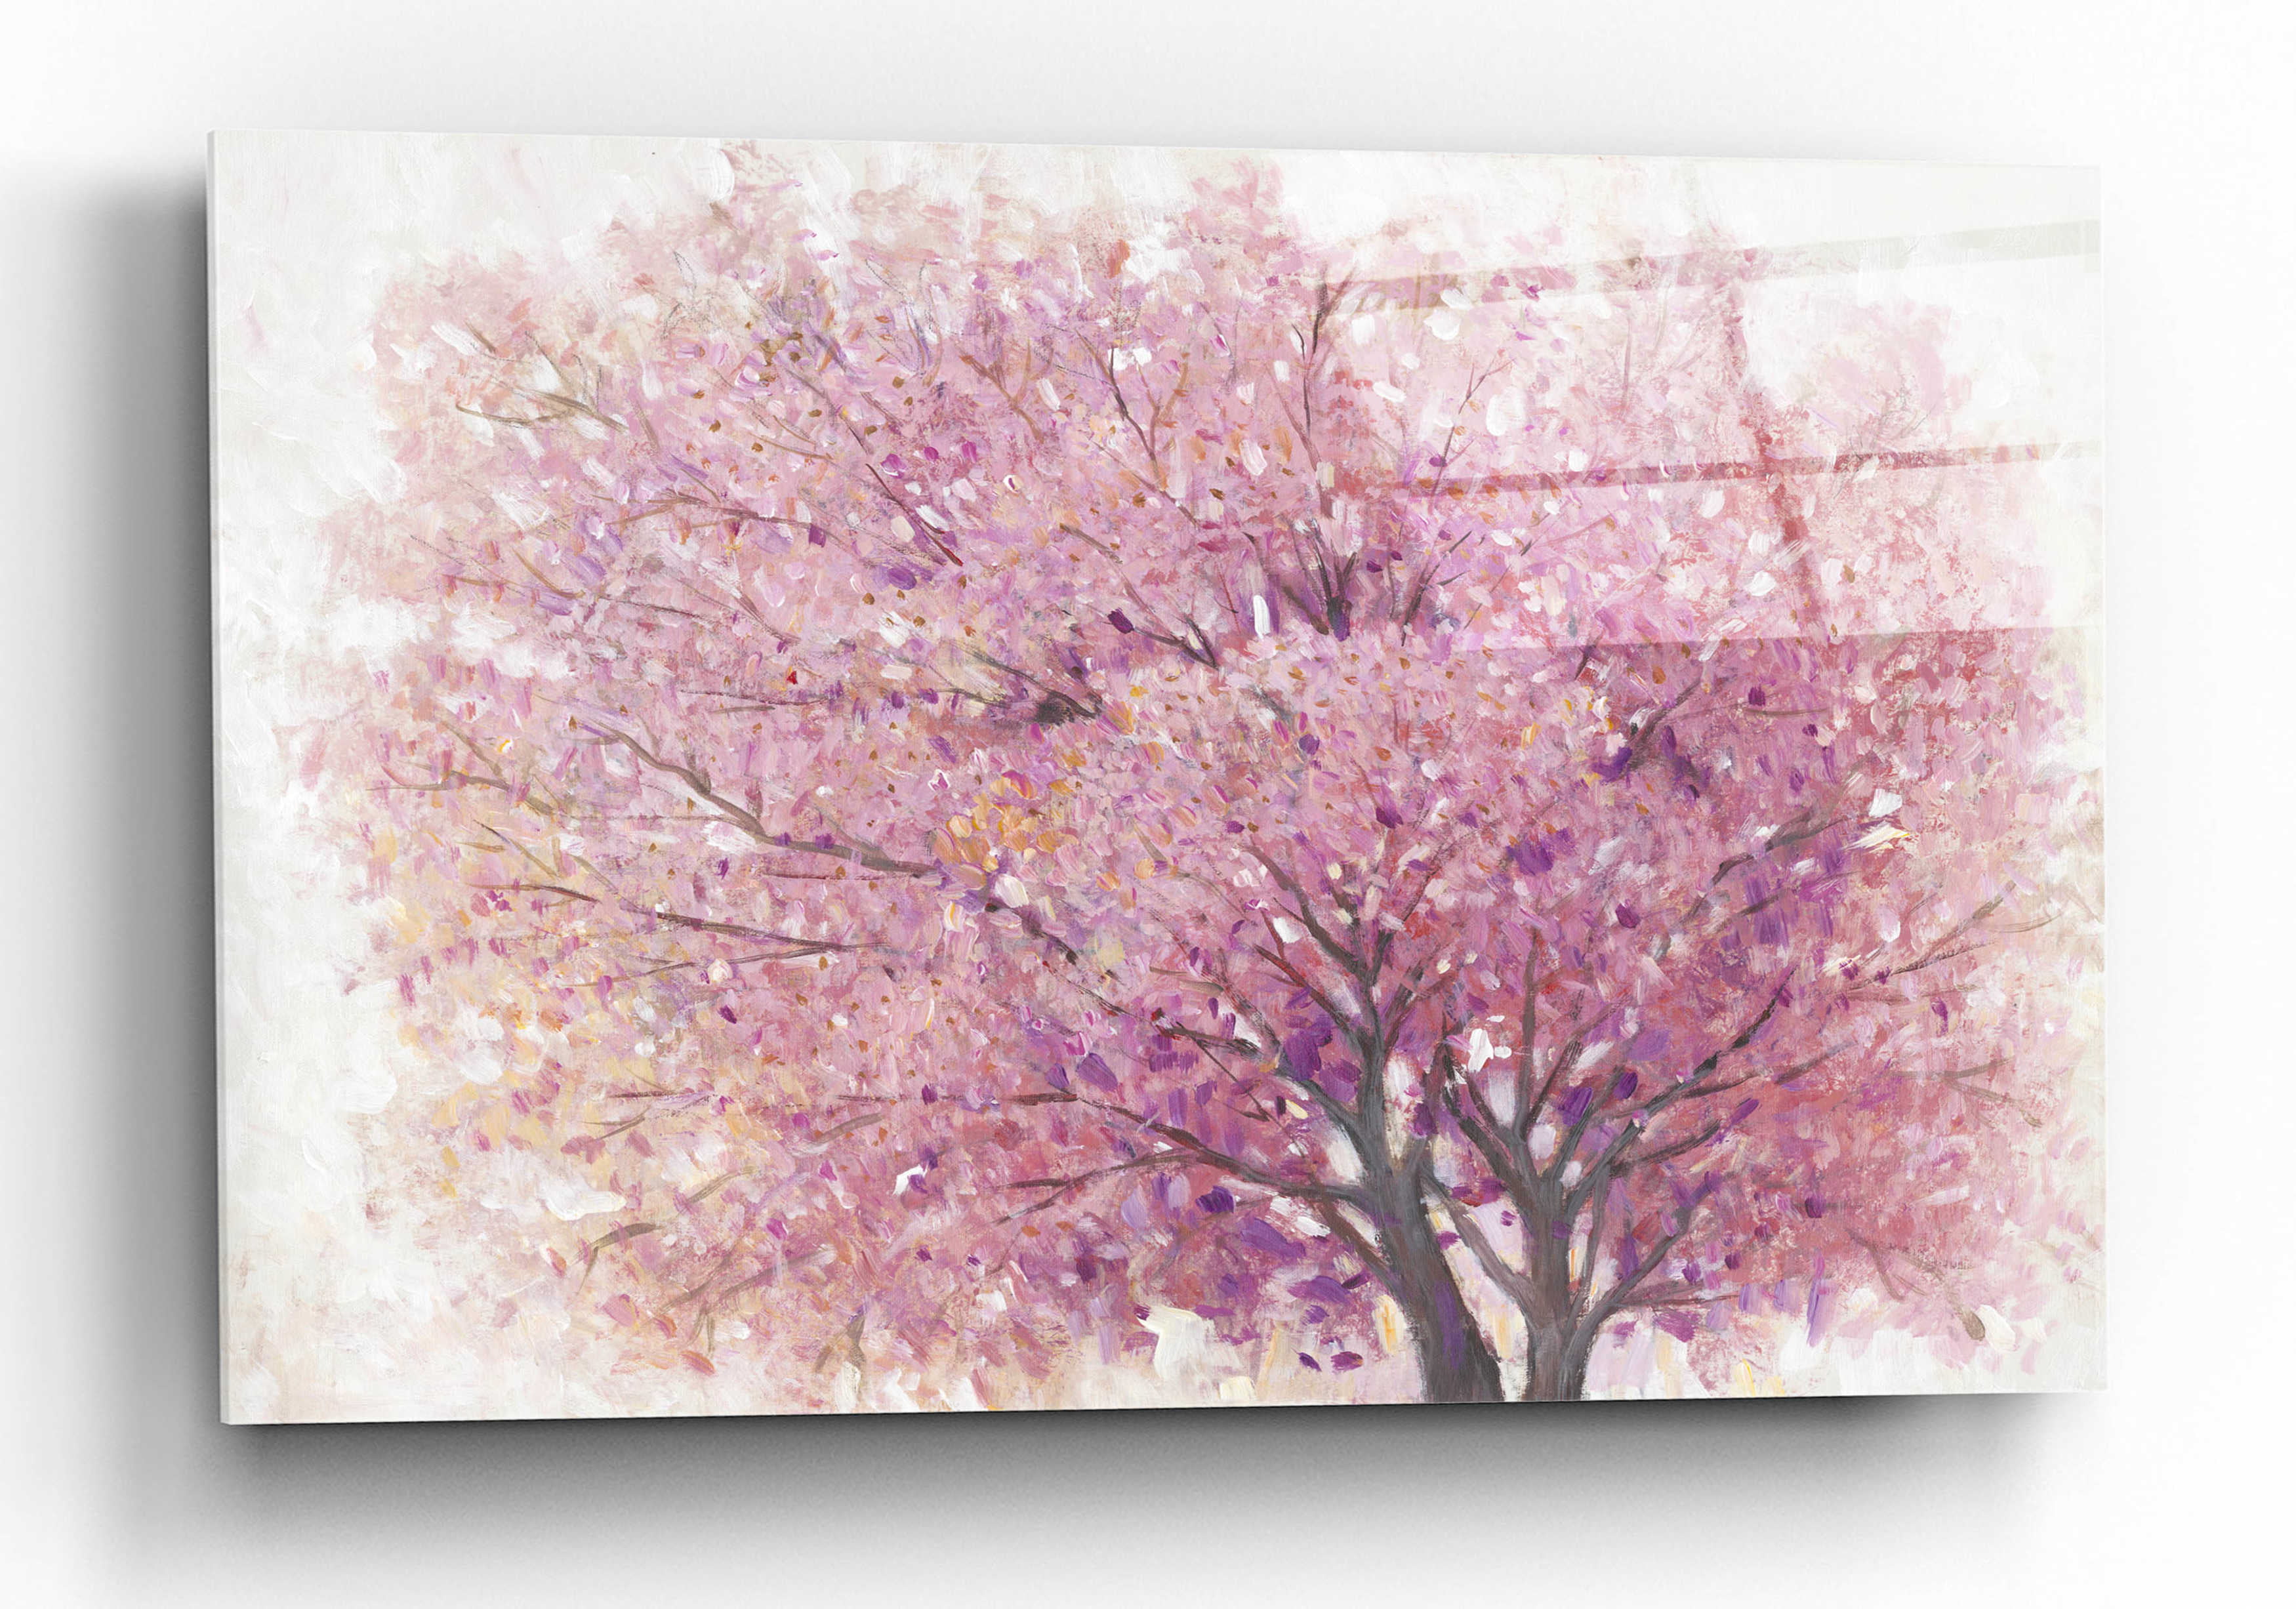 Mon Art Flower Blossom Canvas Print Wall Art for Living Room Spring Pink Cherry Sakura Flowers Painting Floral Pictures Framed Artwork Golden Leaves in Blue Background Romantic Decoration Home Decor 